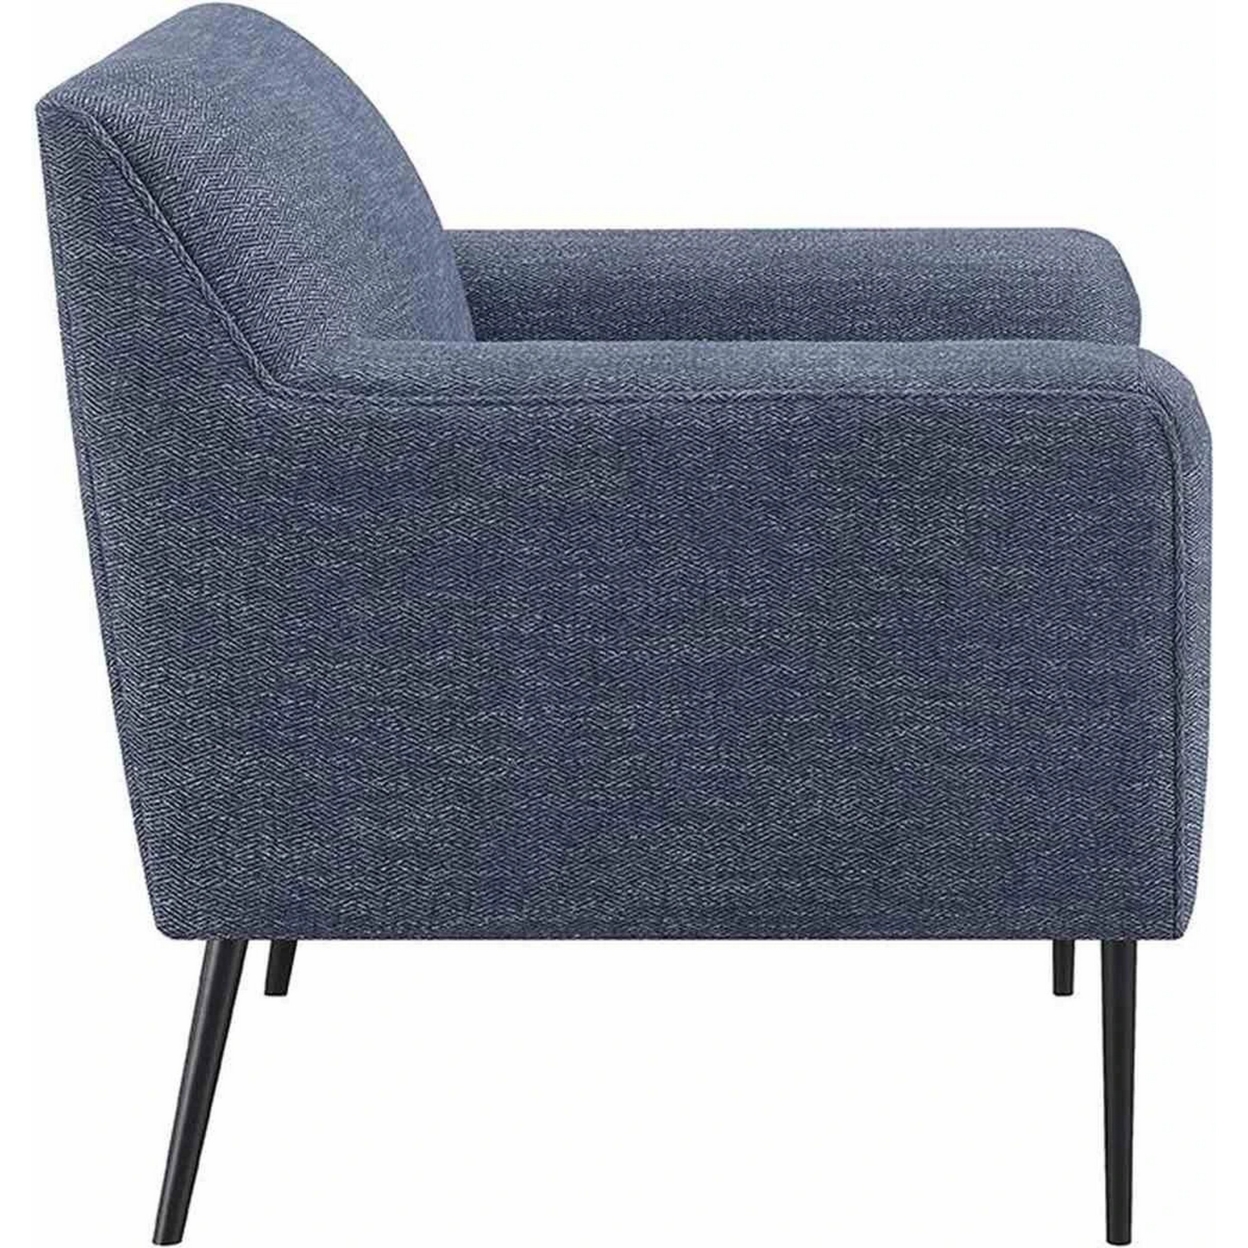 Tobin 33 Inch Accent Chair, Padded Seat, Waterfall Edge, Pleated Arms, Navy